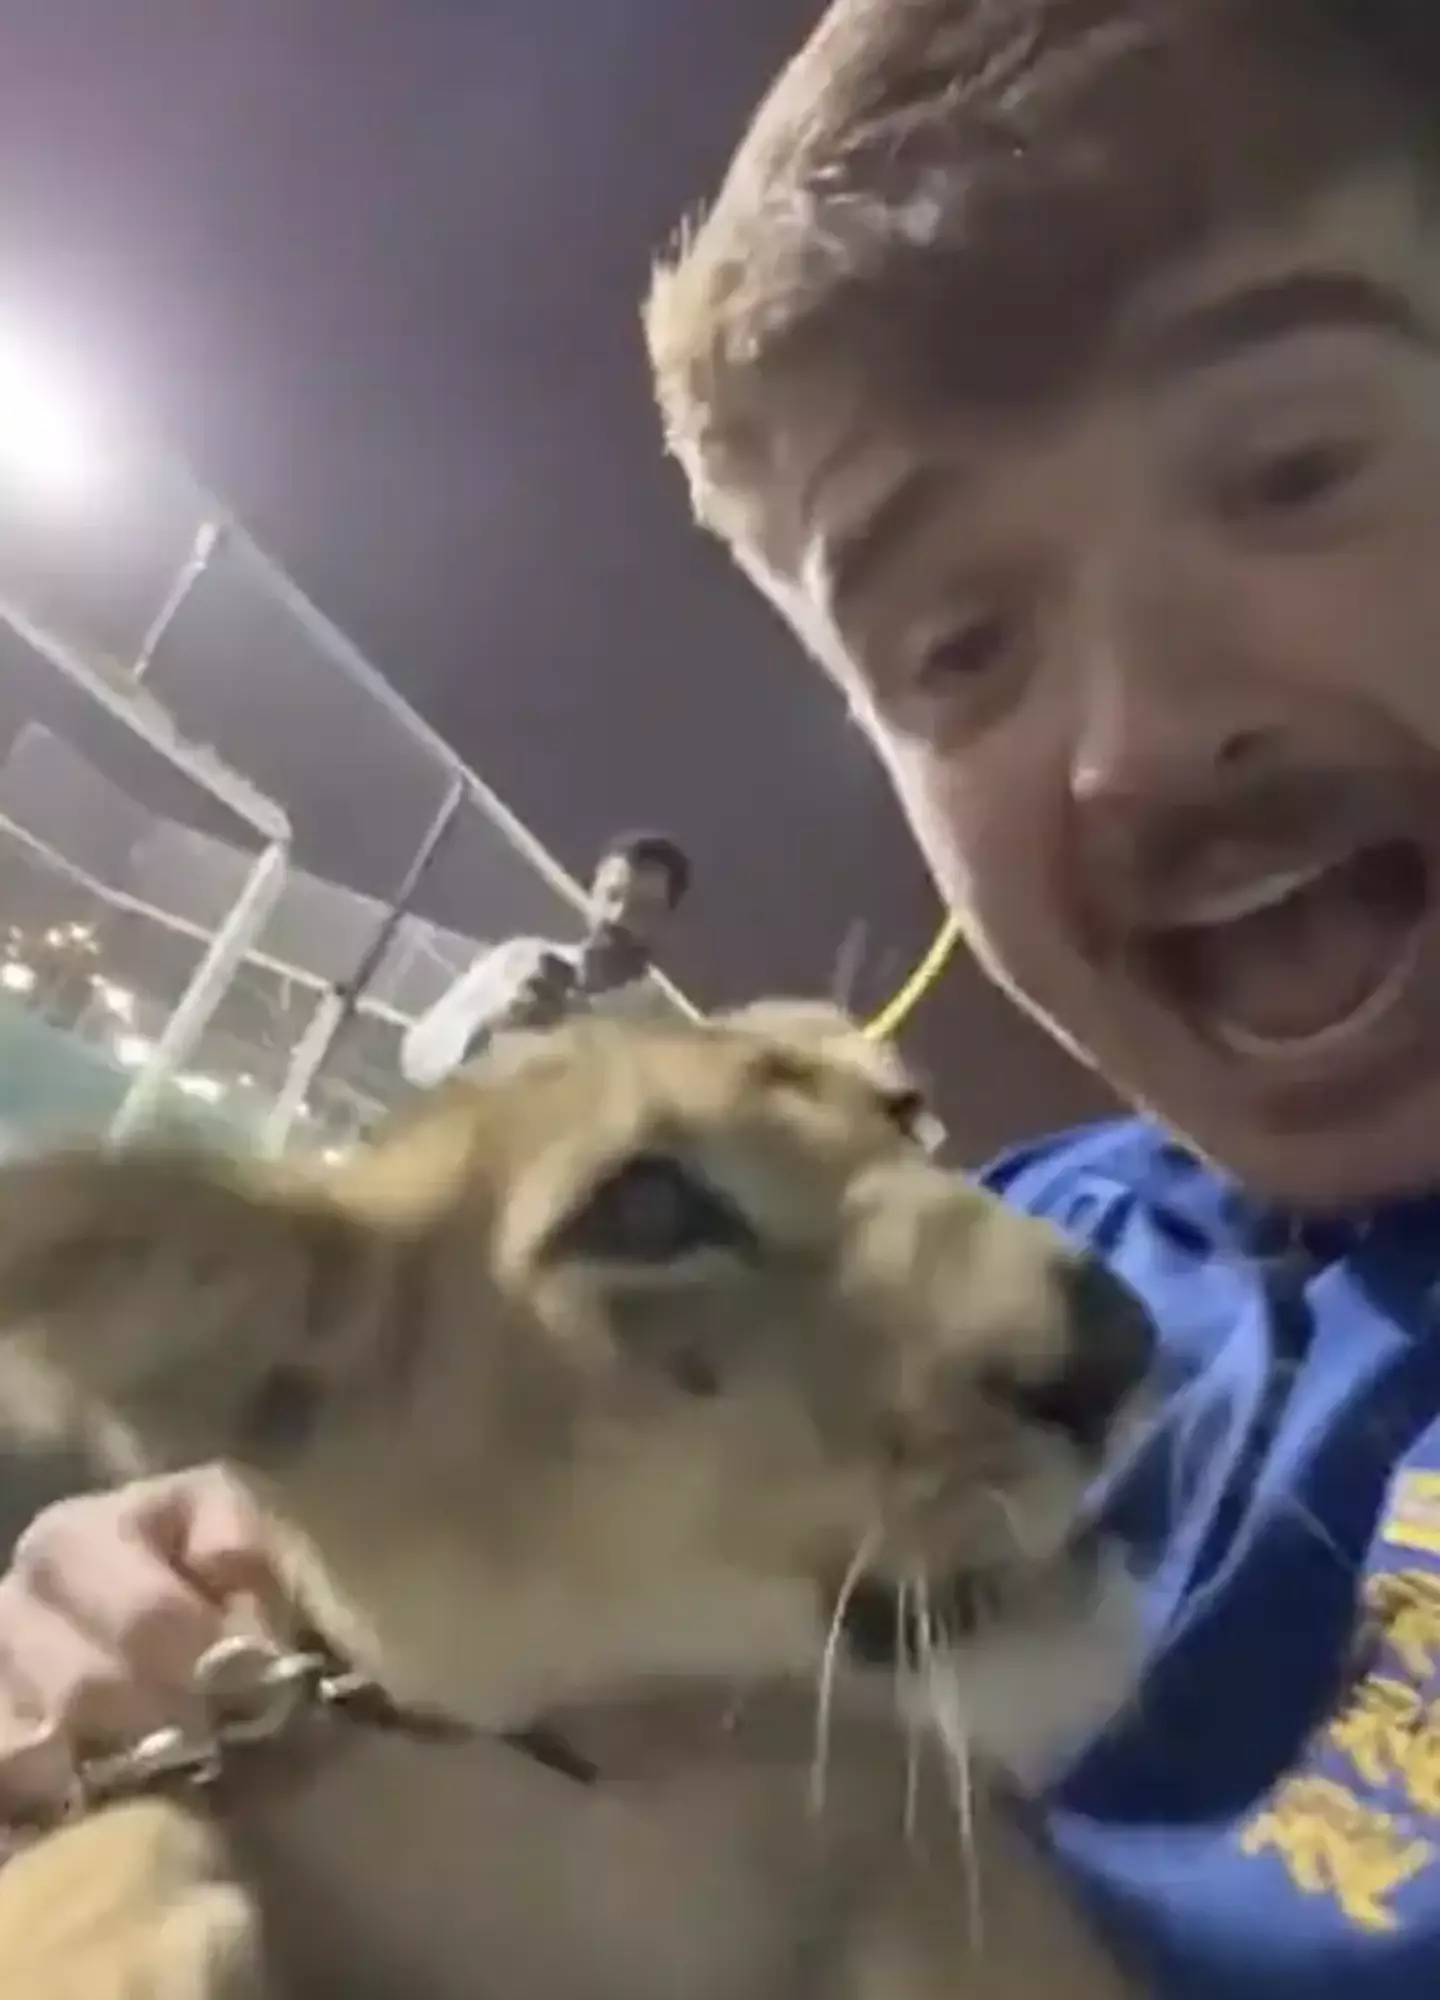 The football fan was filmed playing with a lion at a sheikh's palace.